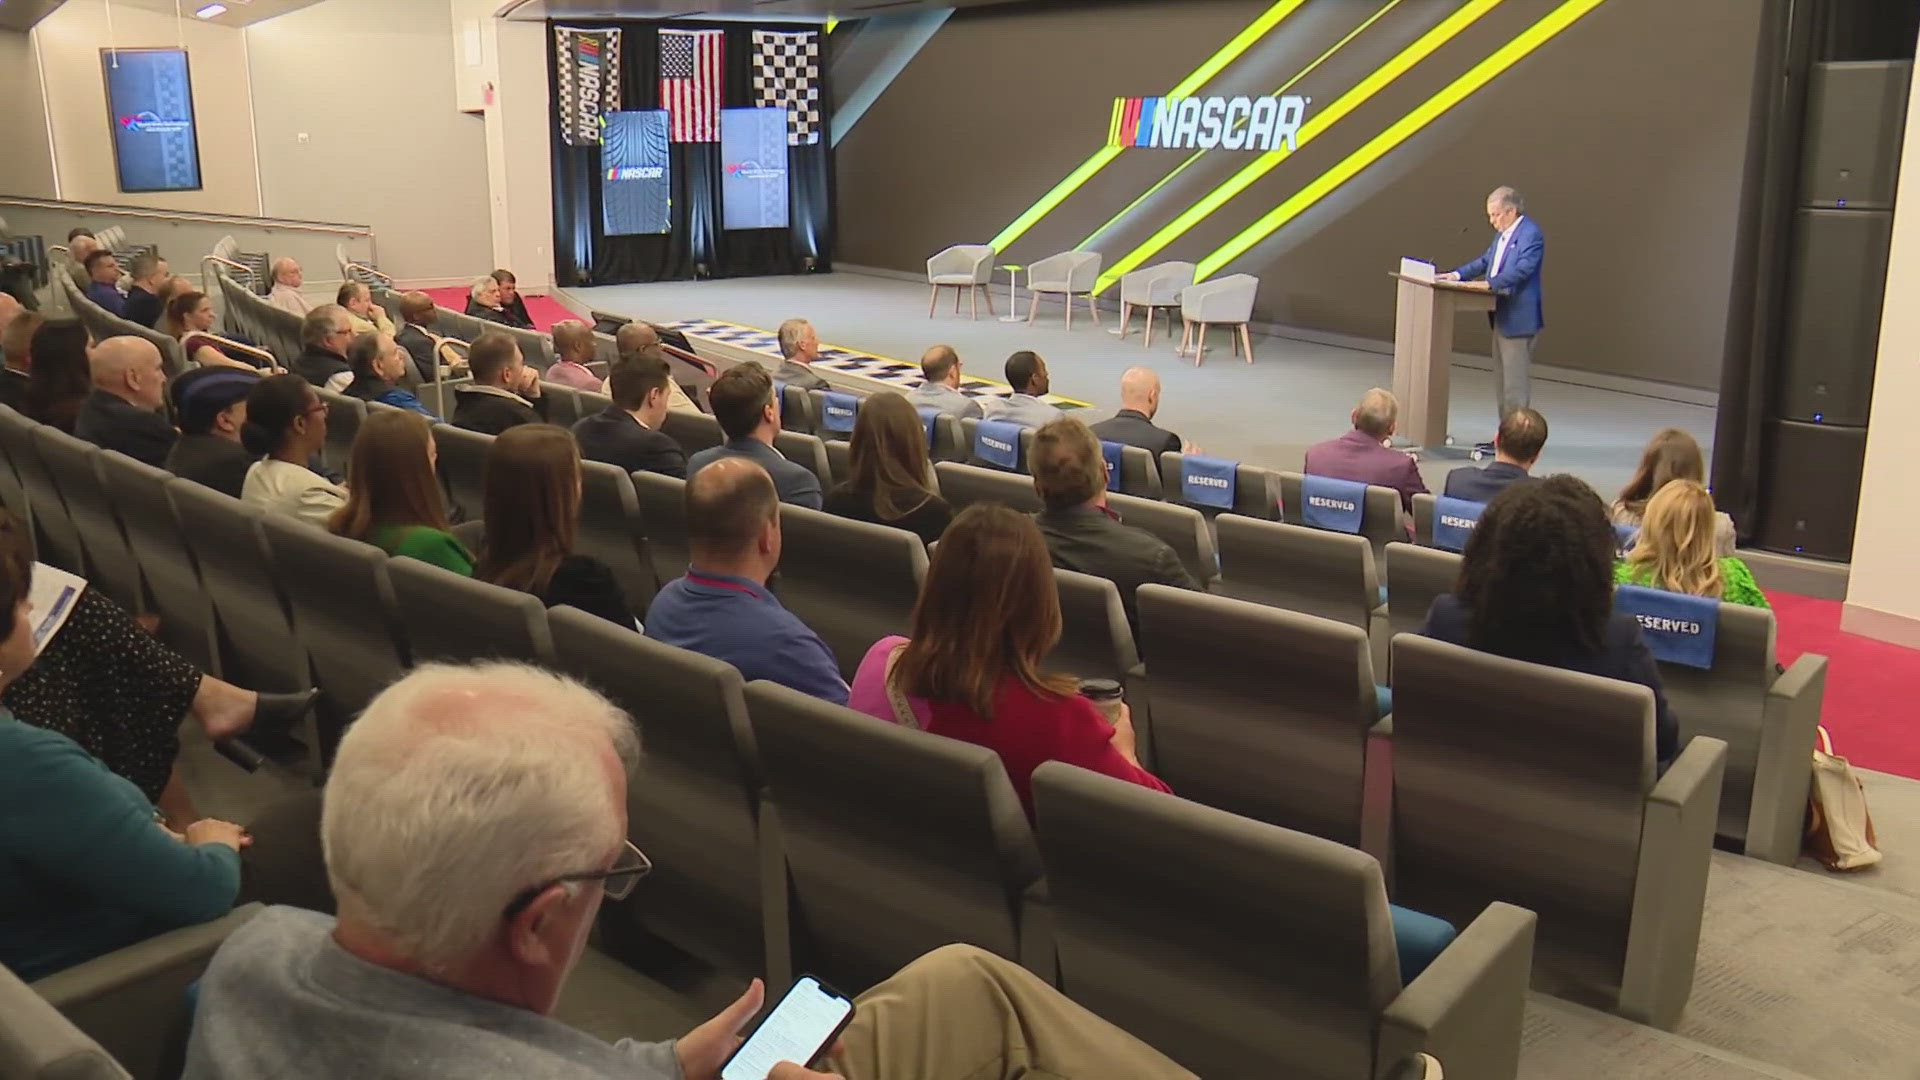 Over 160 business leaders in the St. Louis area came to hear more about the sport from NASCAR President Steve Phelps. The race has been a hit at the turnstile.